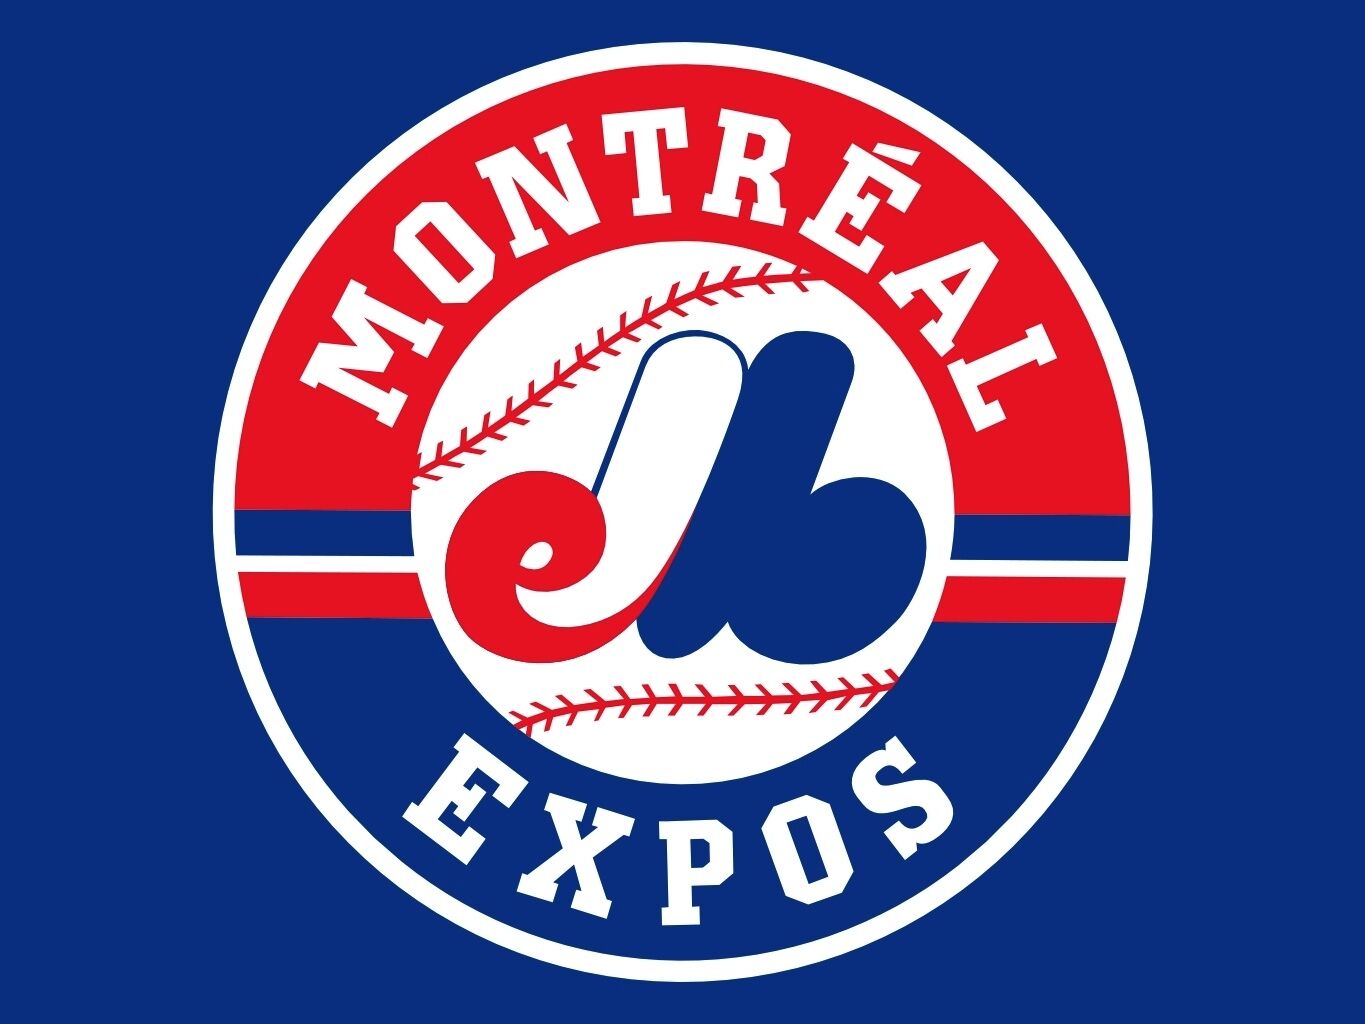 What Happened To The Montreal Expos?